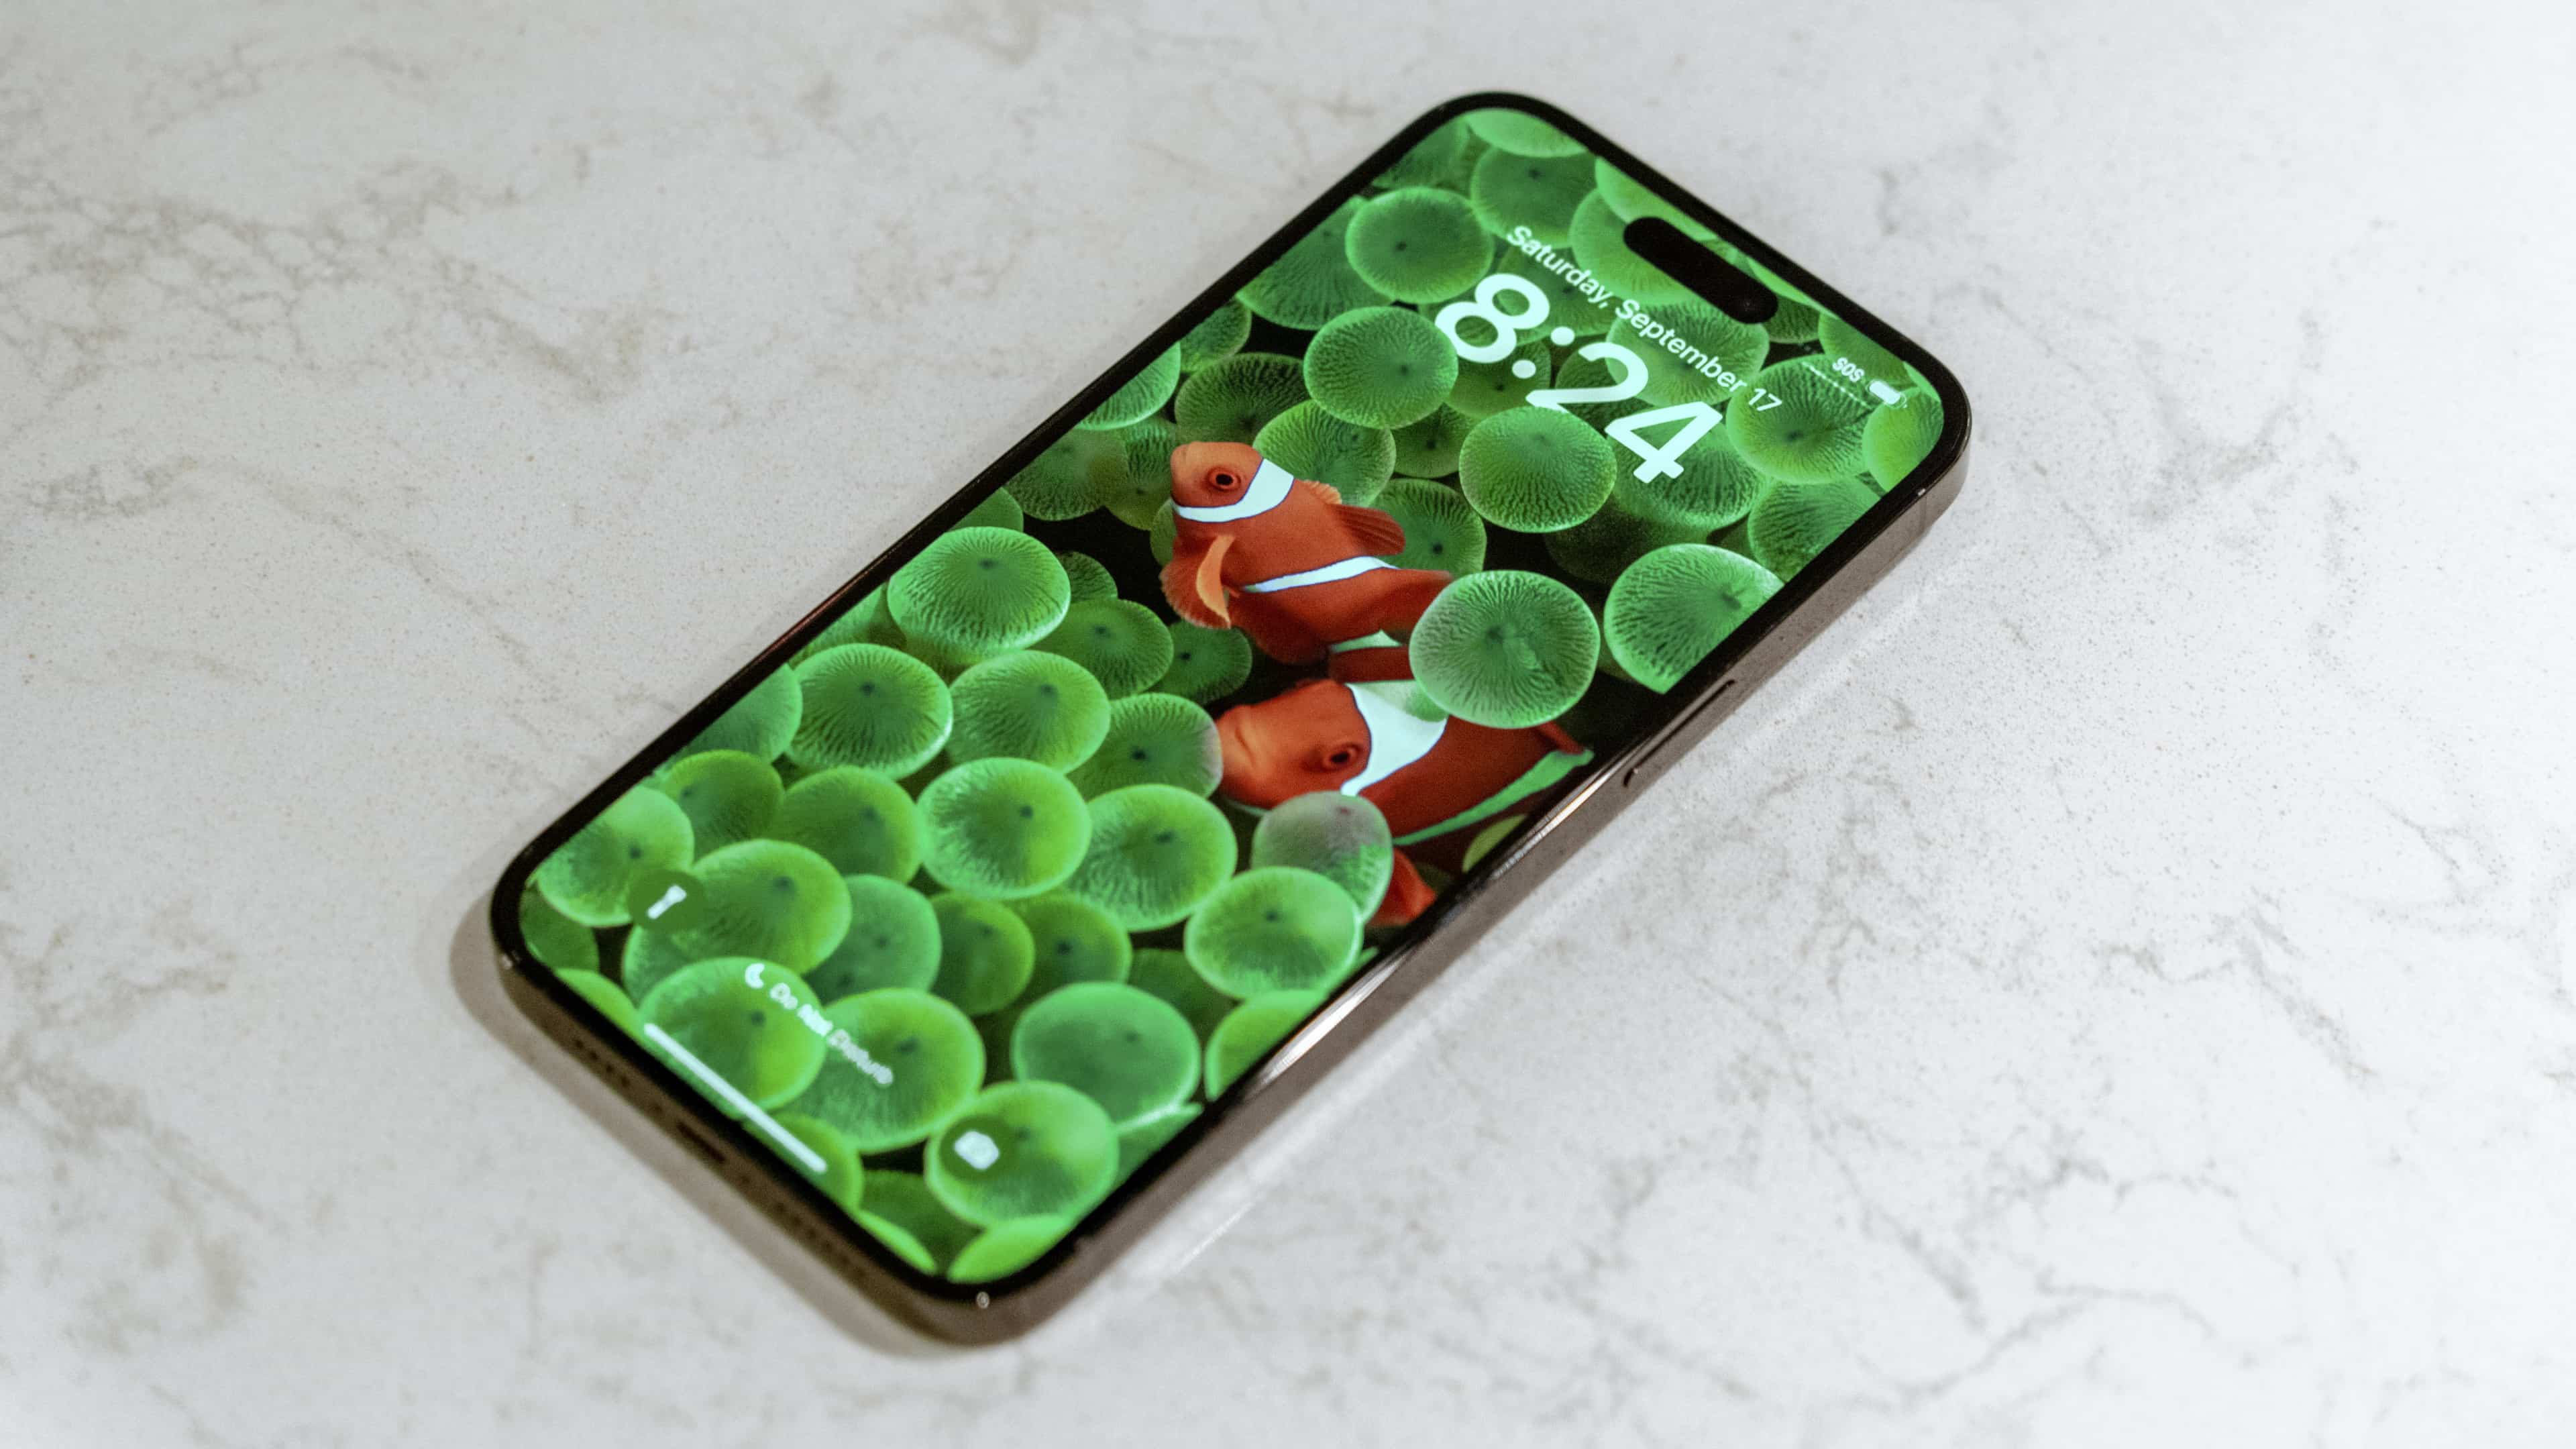 iPhone 14 Pro Max with the clownfish lock screen wallpaper, laid flat on a marble table